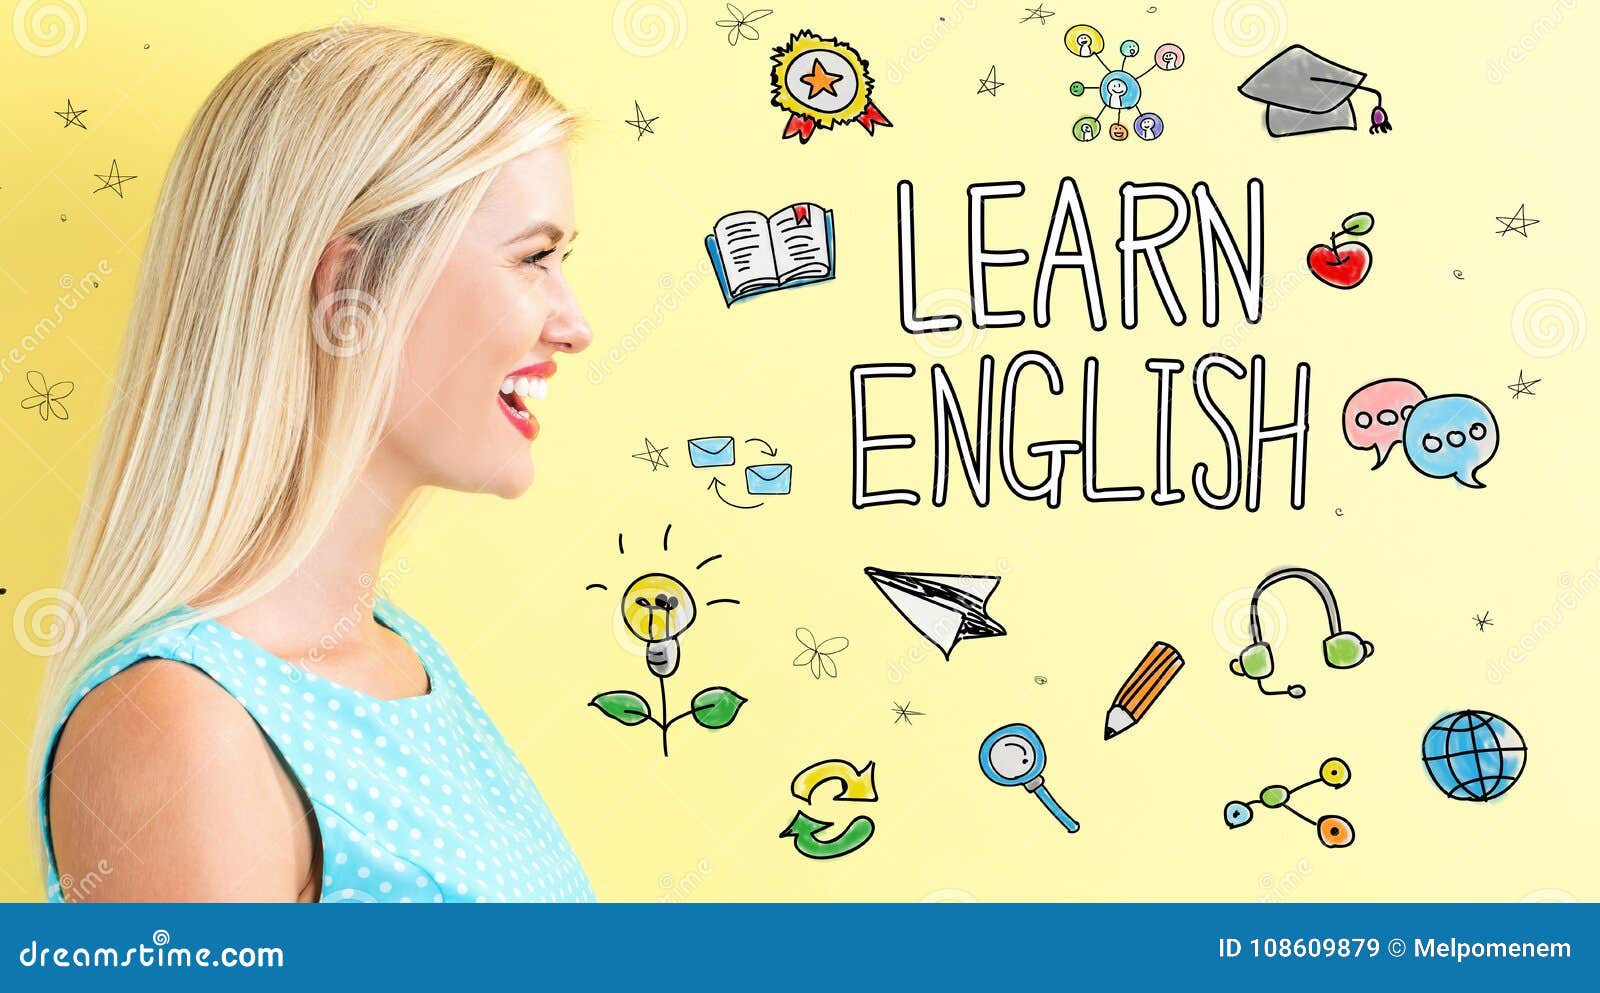 Learn English Theme with Young Woman Stock Image - Image of beautiful